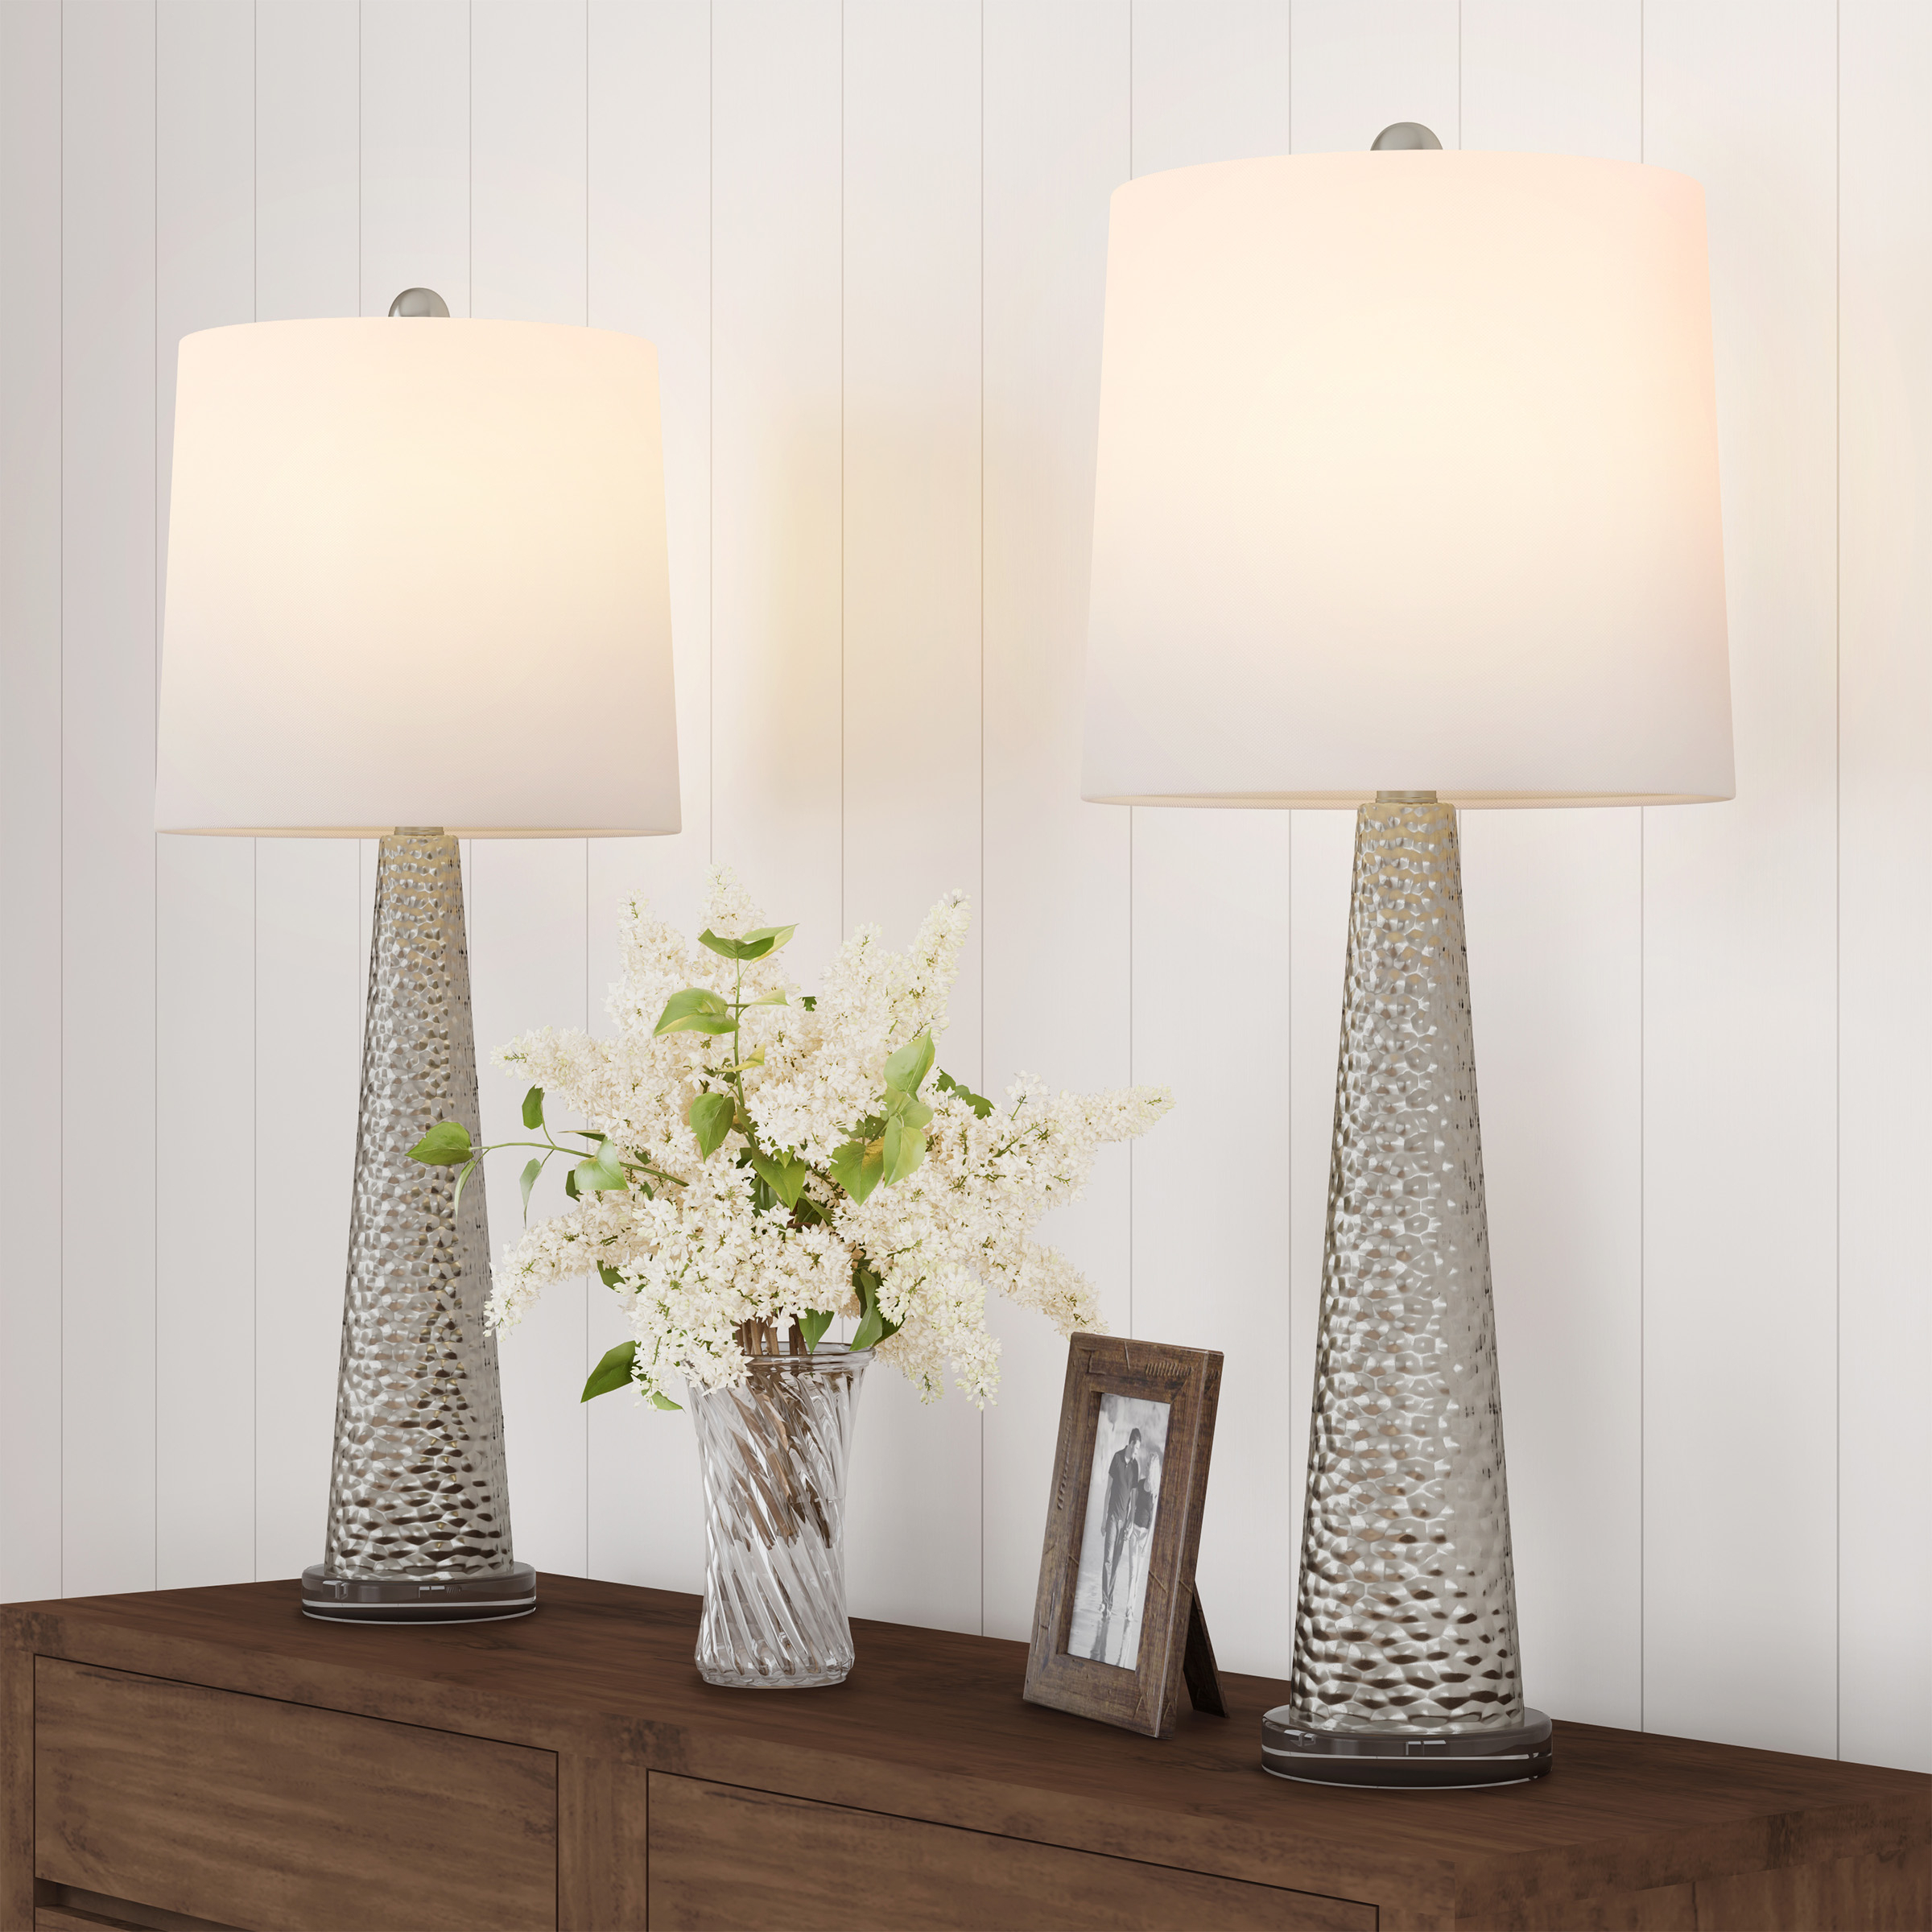 Table Lamps â Set Of 2 Contemporary Hammered-Look Glass For Bedroom, Living Room, Office With Energy-Efficient LED Bulbs